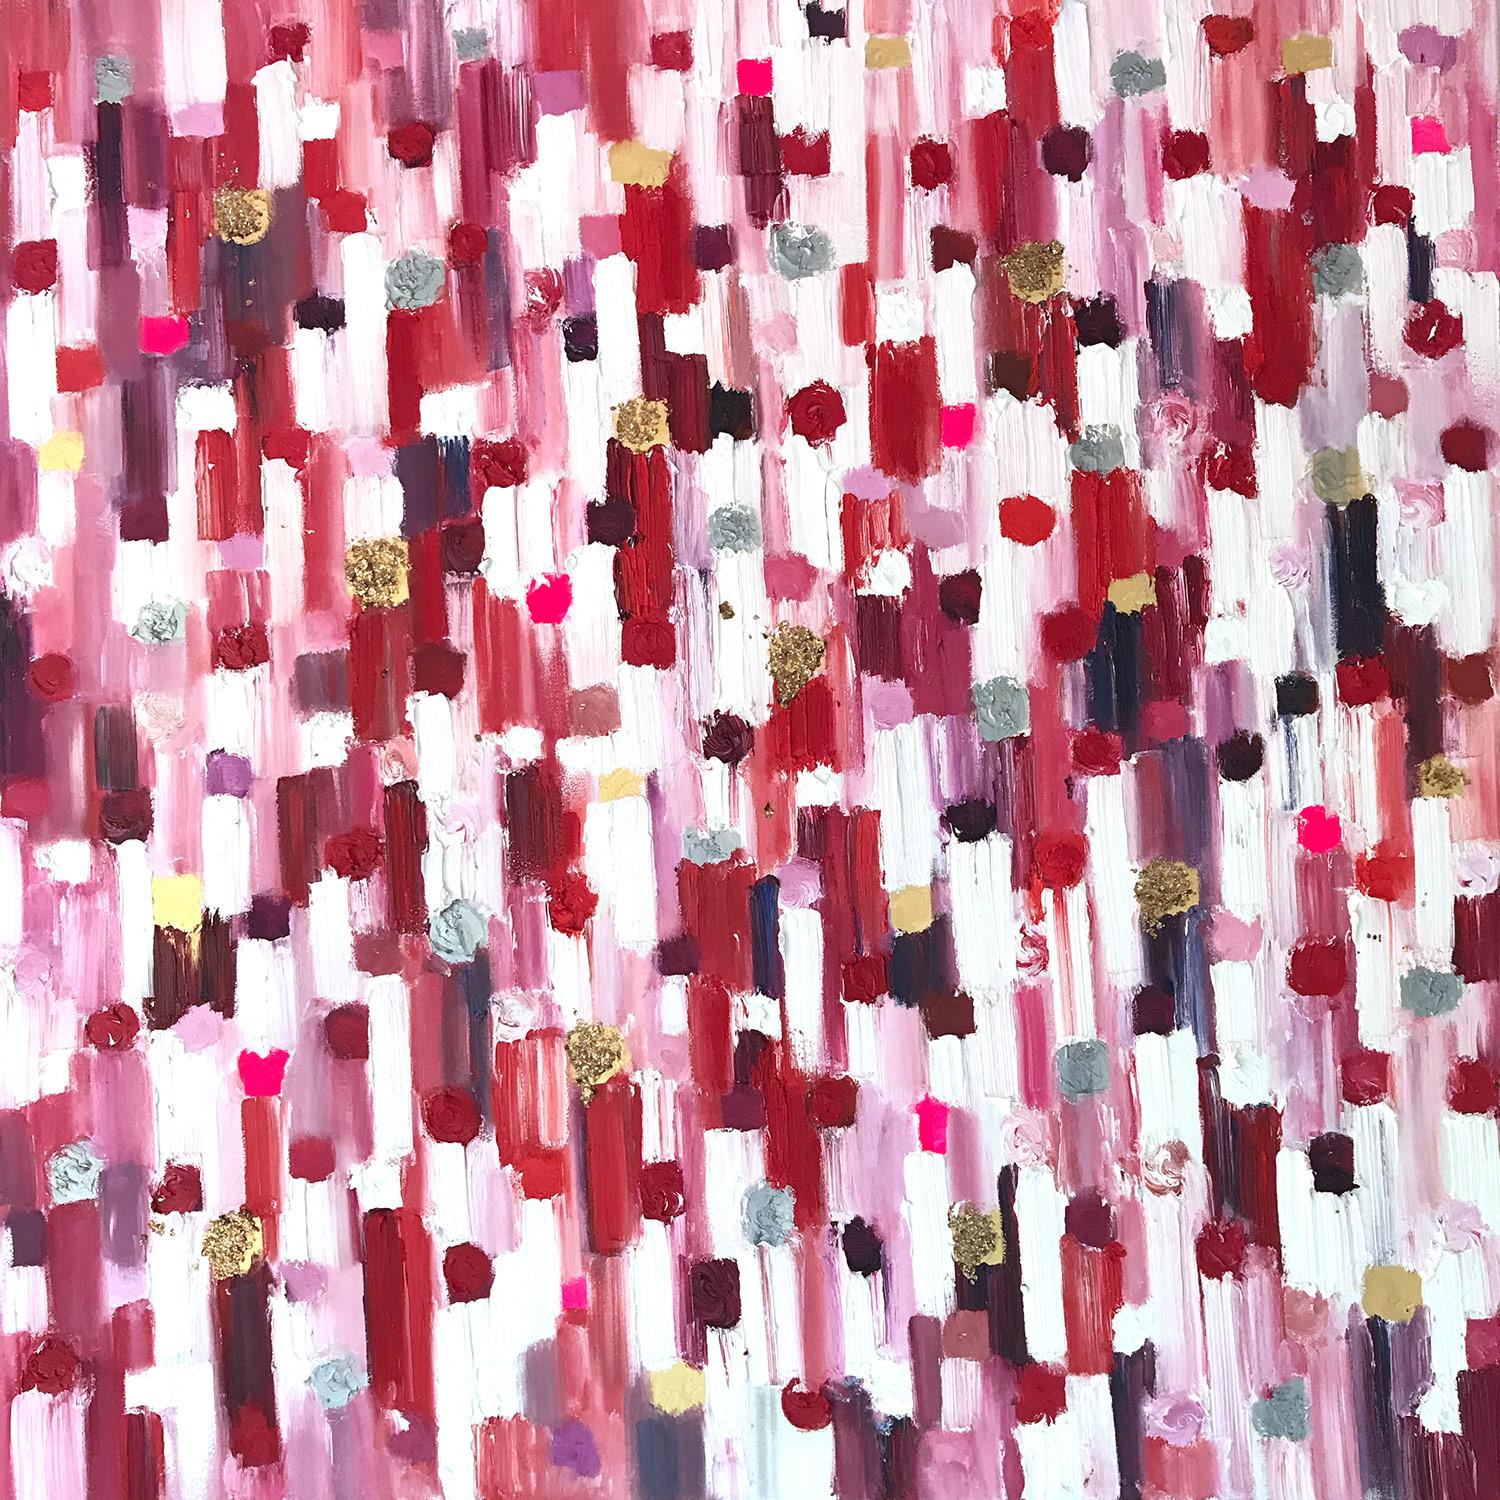 Cindy Shaoul Abstract Painting - "Dripping Dots - Monaco Sunset" Contemporary Abstract Oil Painting on Canvas